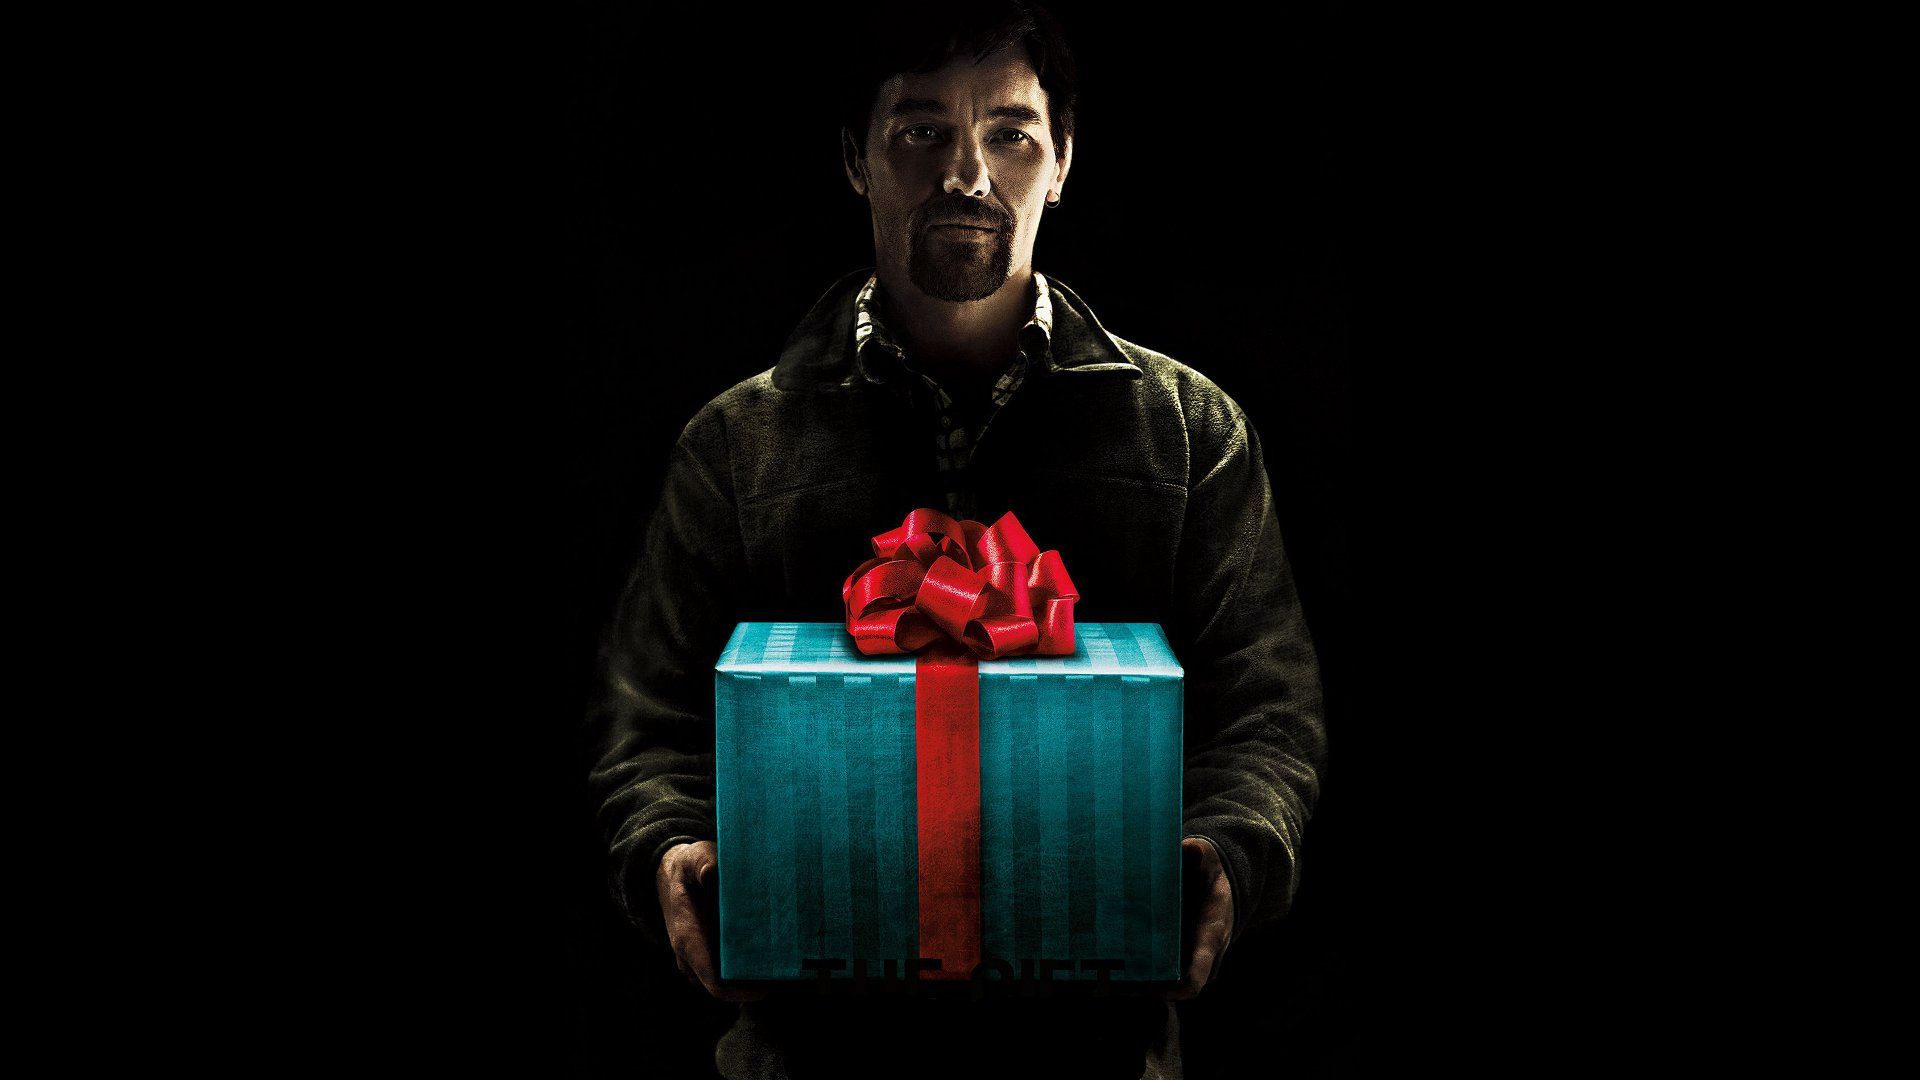 The Gift background